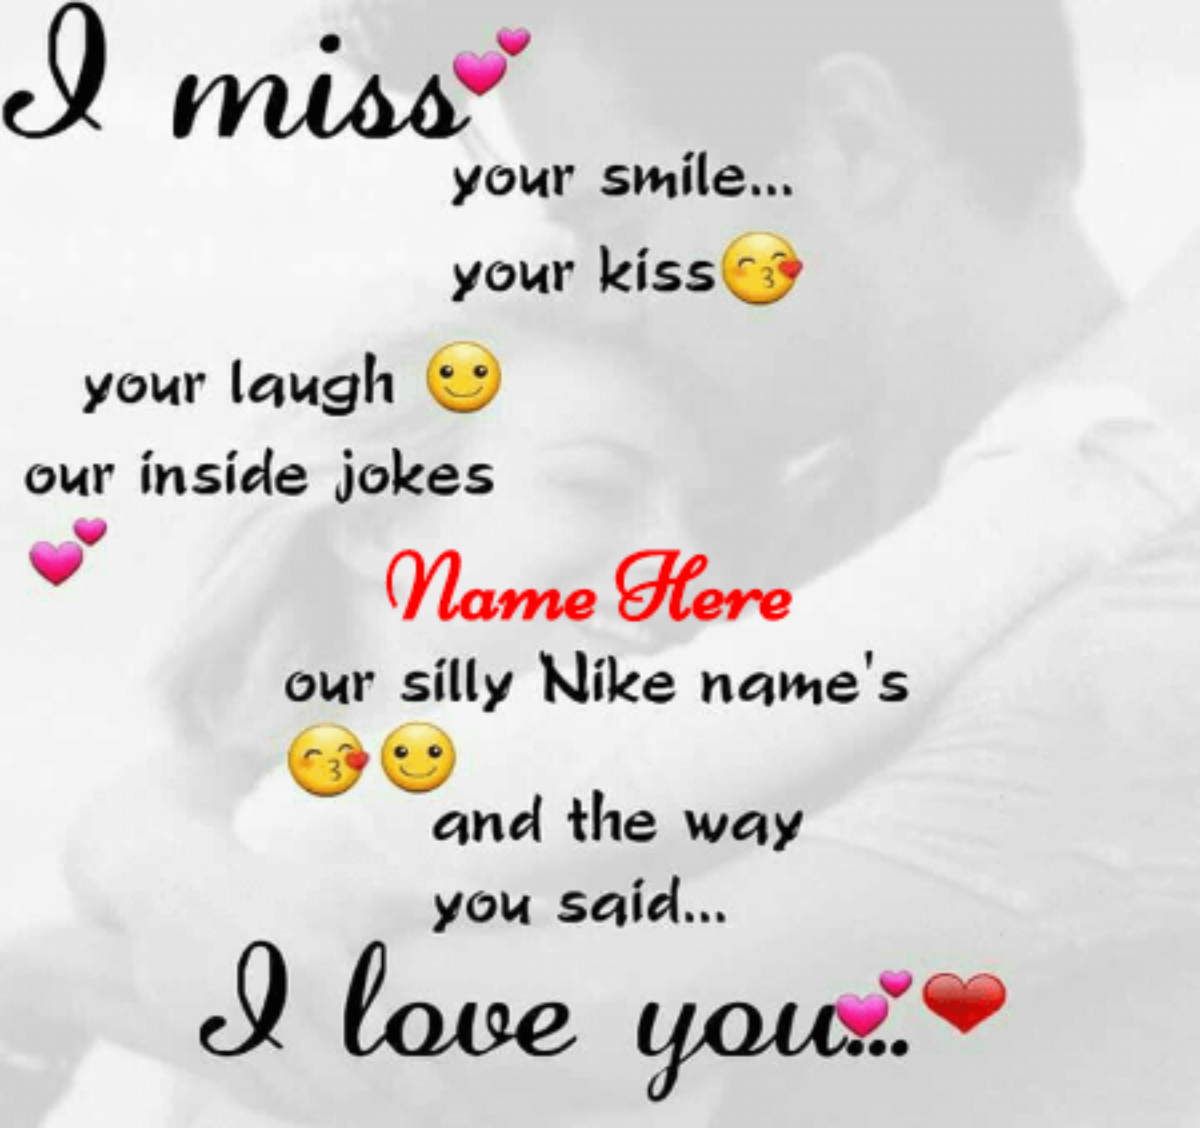 I Miss you Like Crazy - Beautiful Miss You Images and Quotes